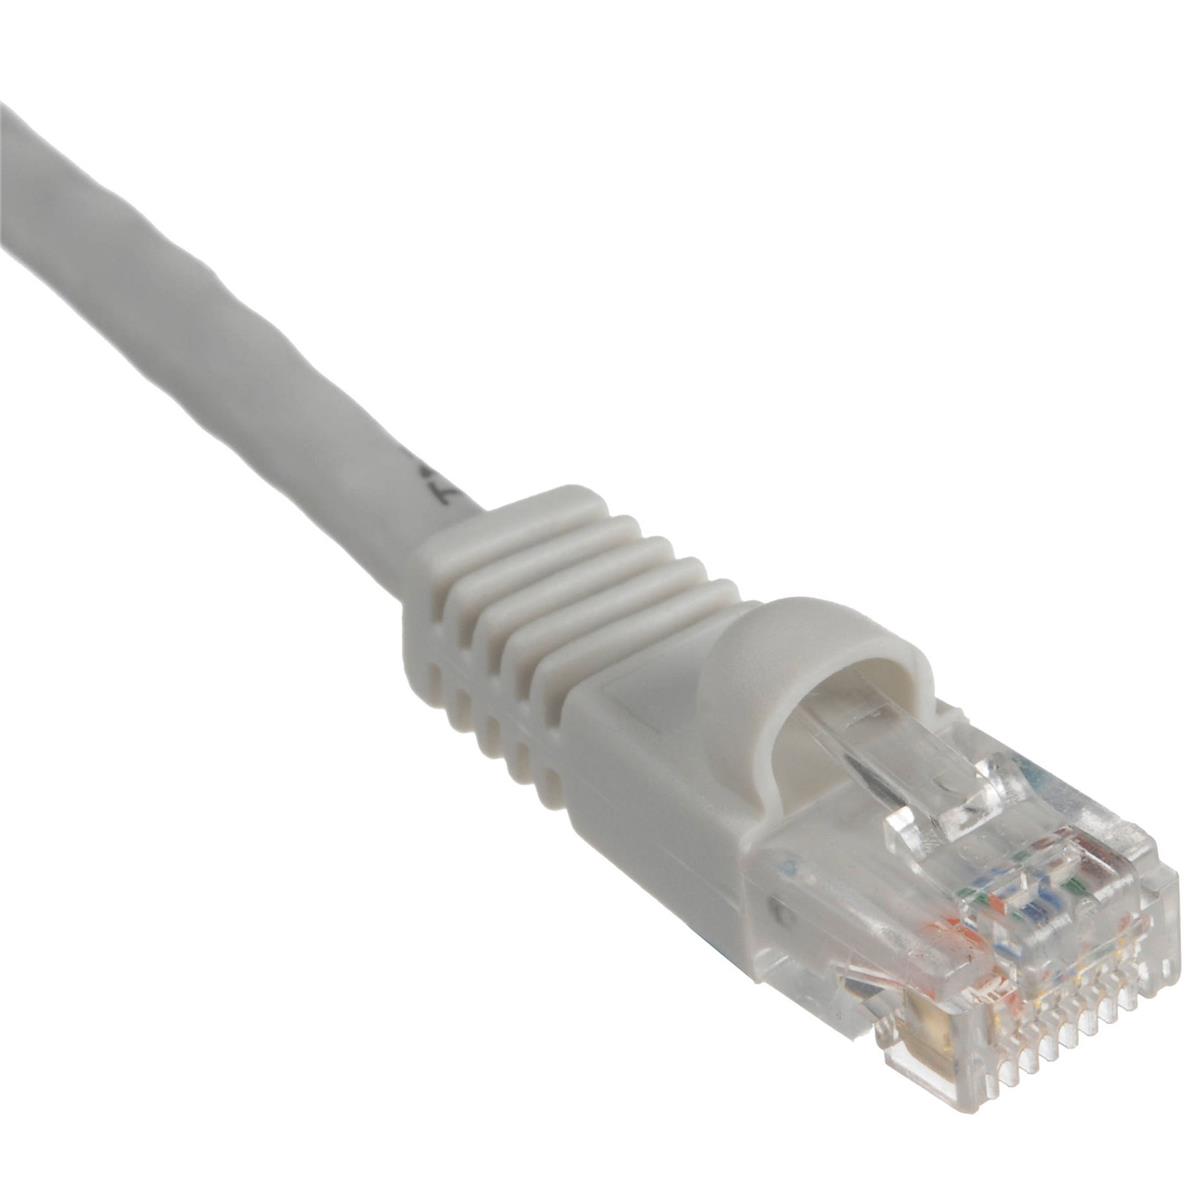 Photos - Other for Computer Comprehensive 50' Cat5e 350Mhz Snagless Patch Cable, White CAT5-350-50WHT 